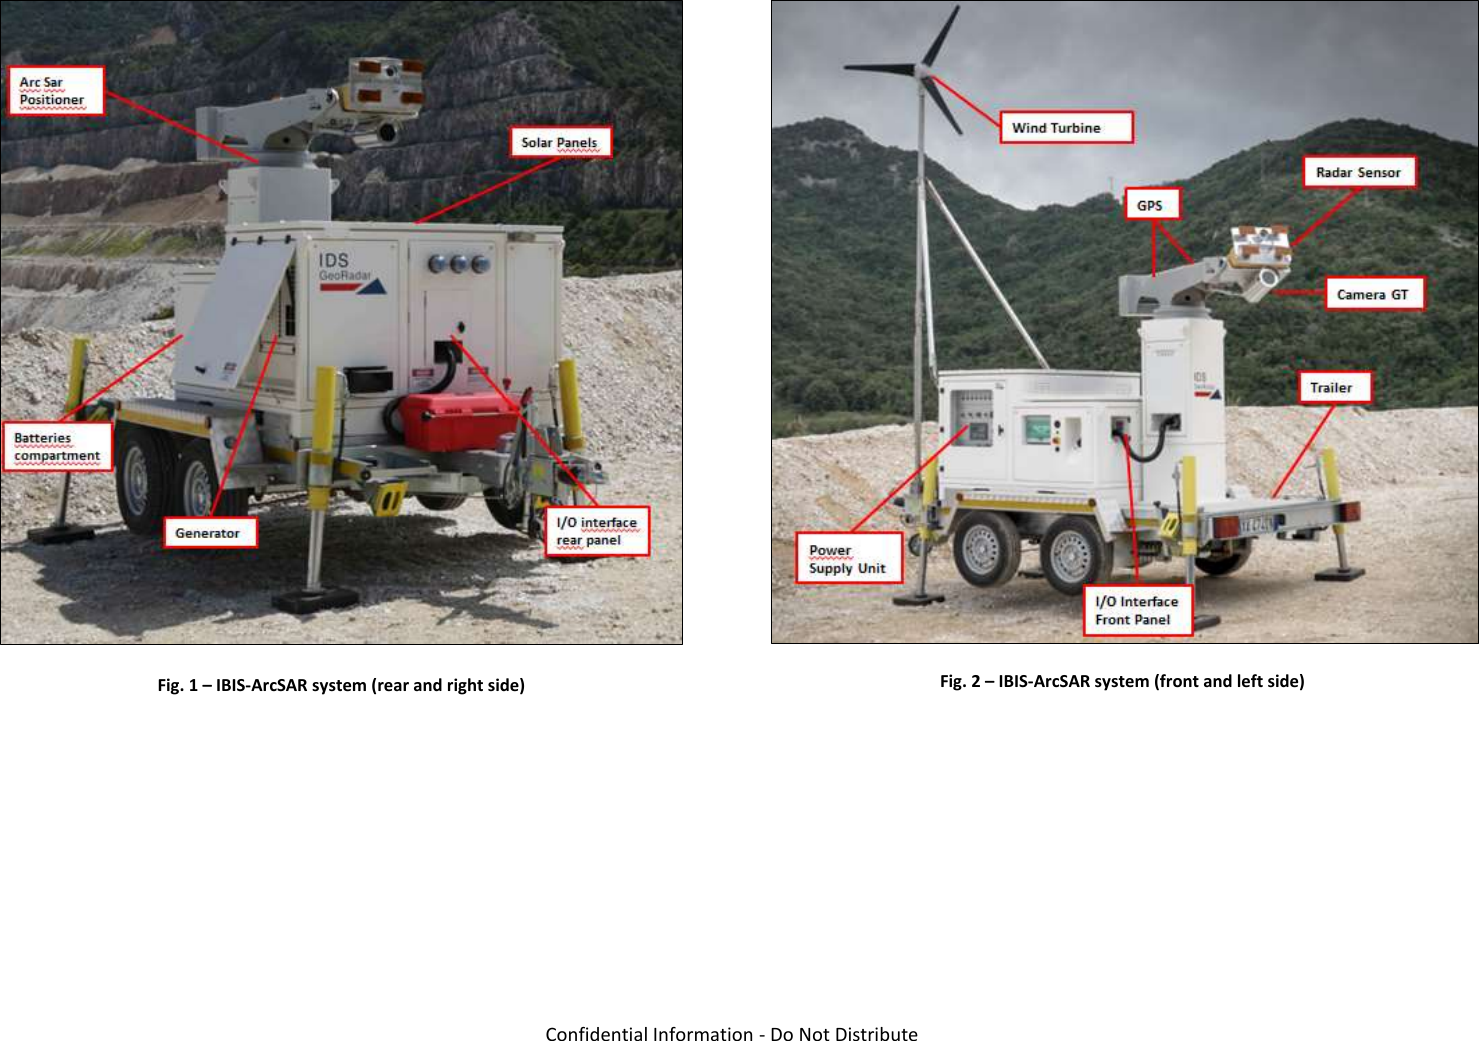   Confidential Information - Do Not Distribute  Fig. 1 – IBIS-ArcSAR system (rear and right side)  Fig. 2 – IBIS-ArcSAR system (front and left side)  